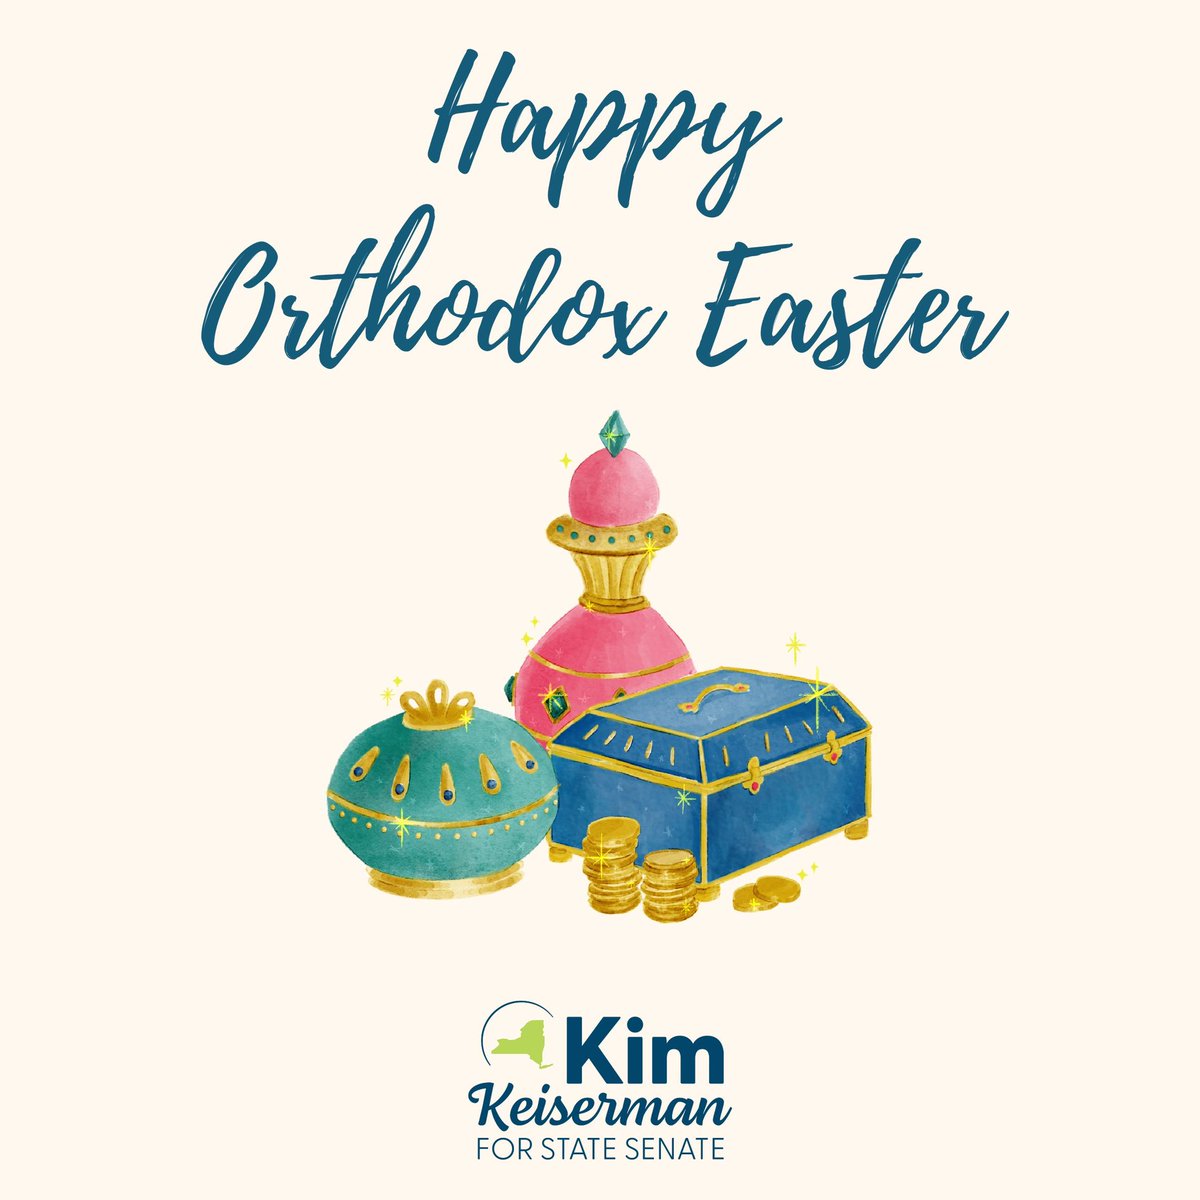 Happy Orthodox Easter to all those who celebrate! As you gather with family and friends this evening, I wish you nothing but joy and happiness.